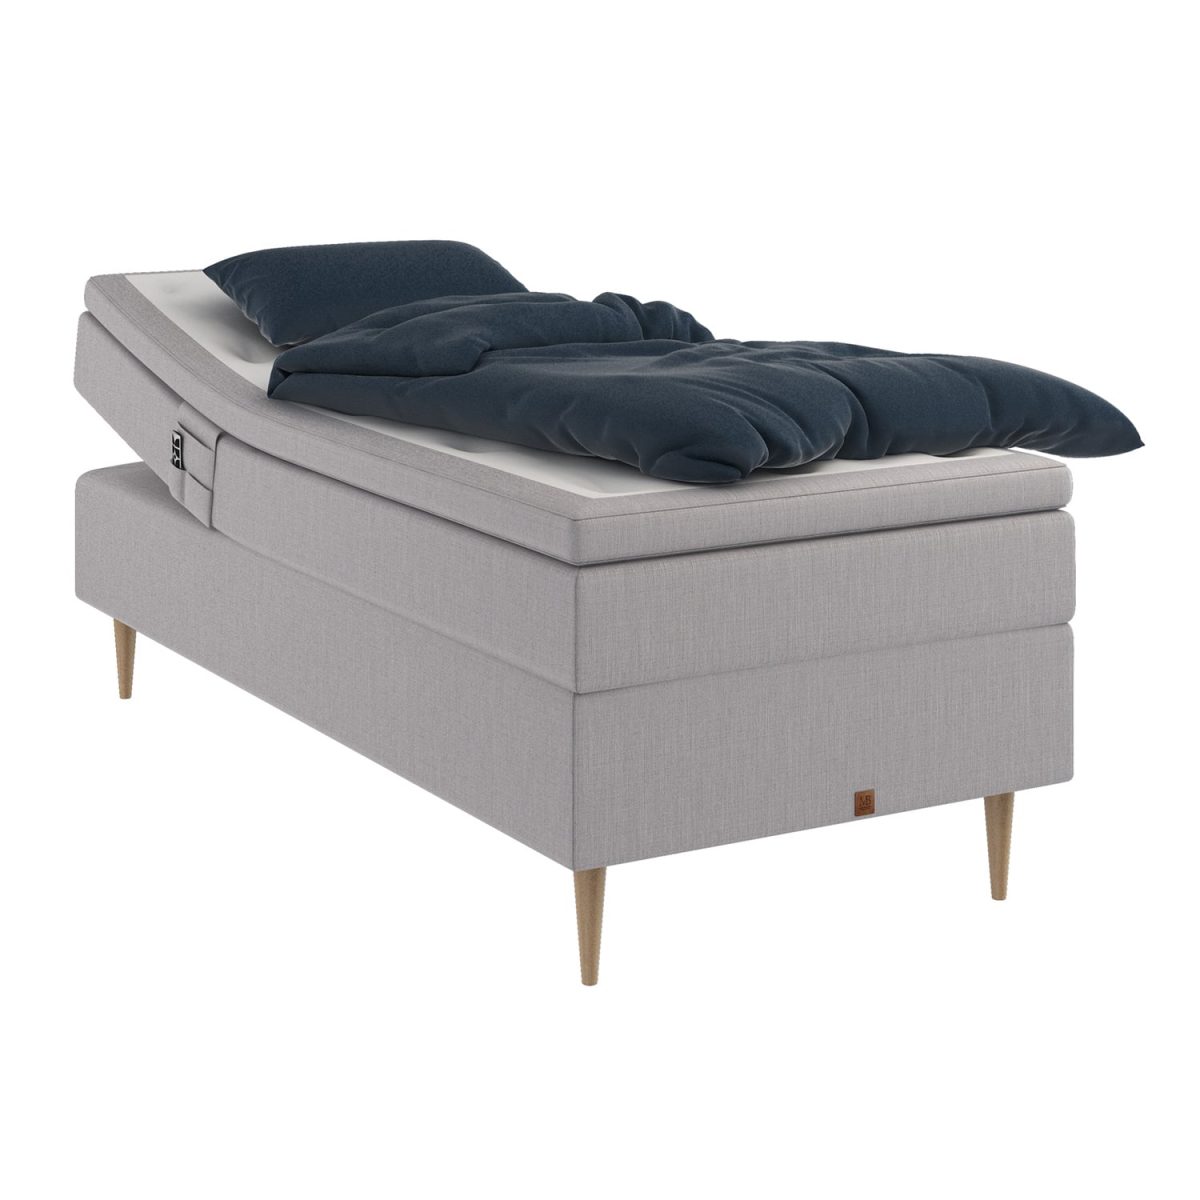 MasterBed Select - Multi Elevation - 80x200